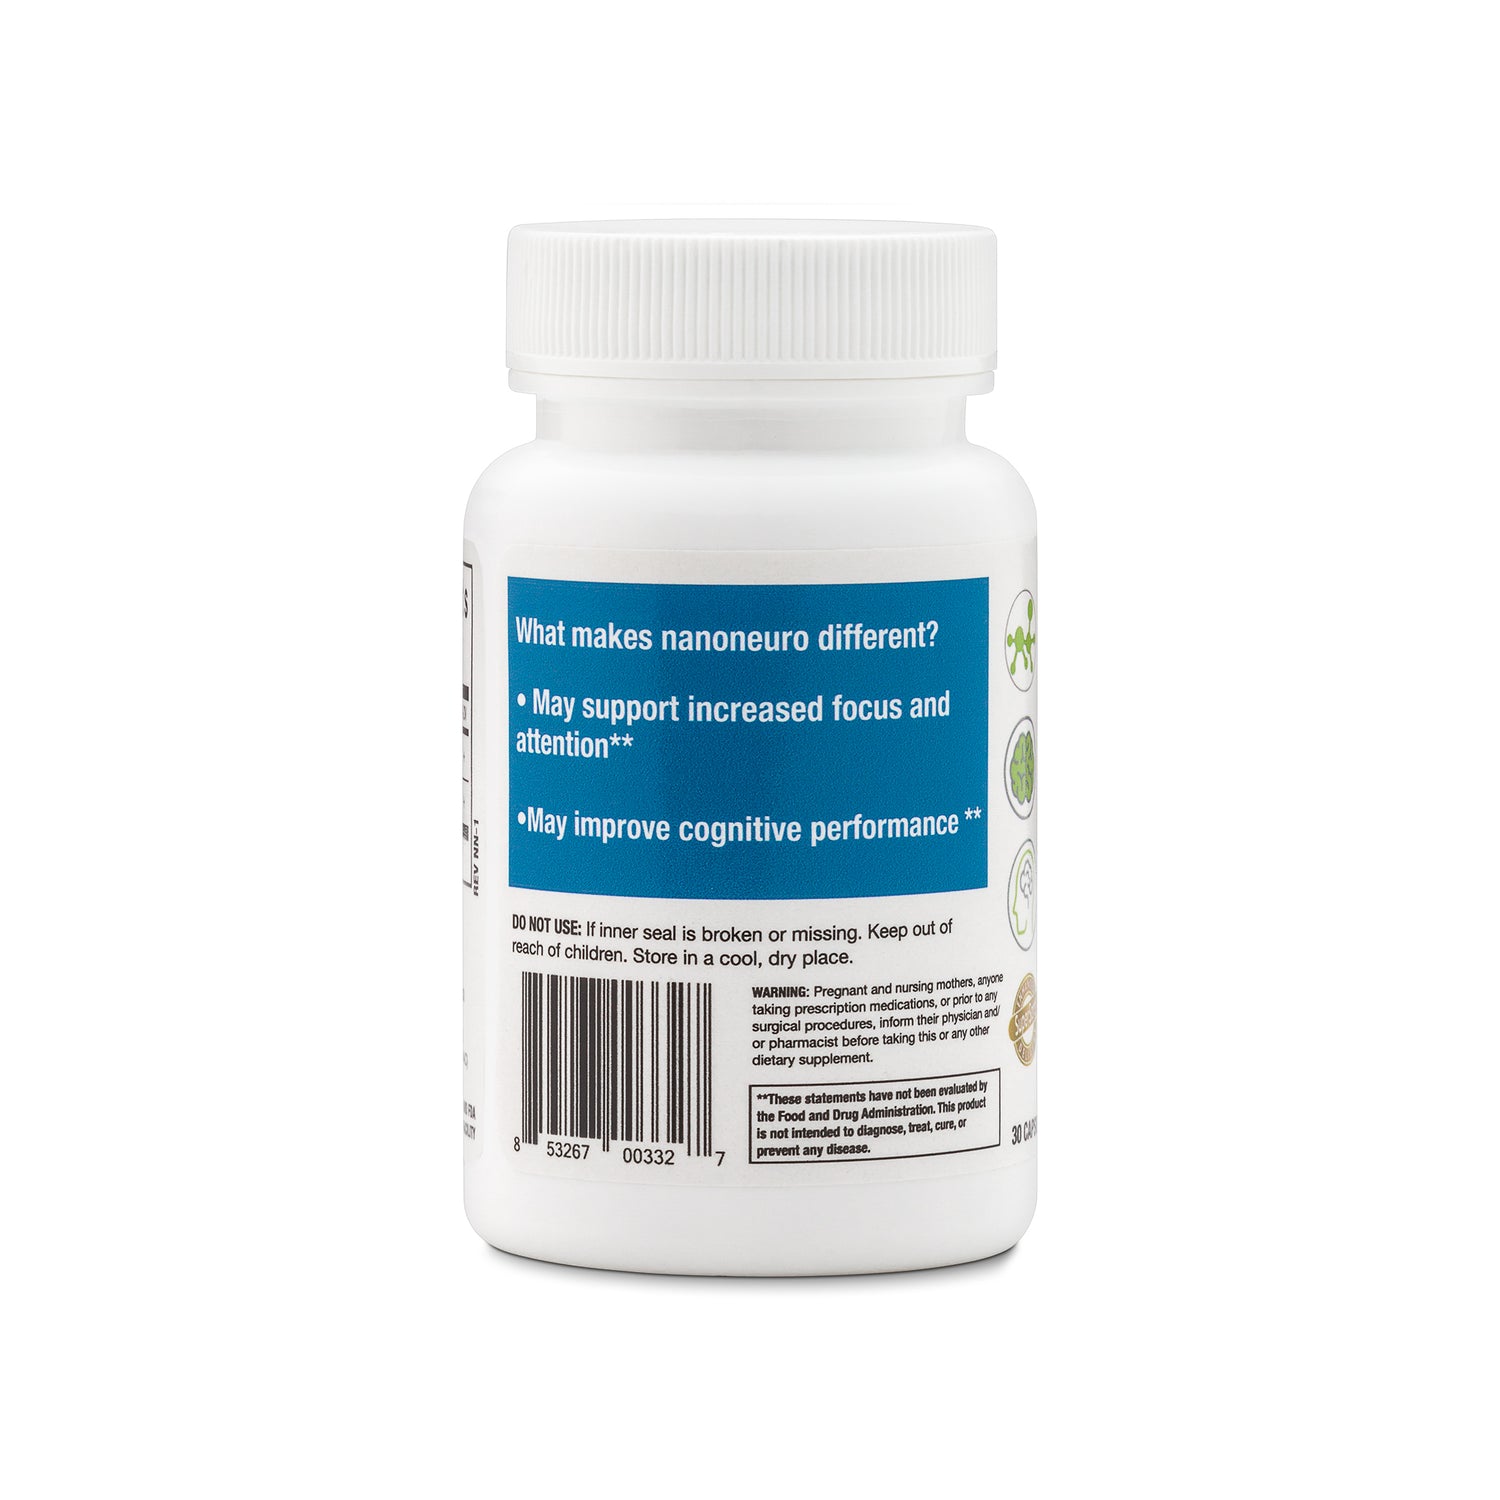 snanoneuro memory brain support n-acetyl-l-cysteine NAC l-theanine supplement capsule - health benefits